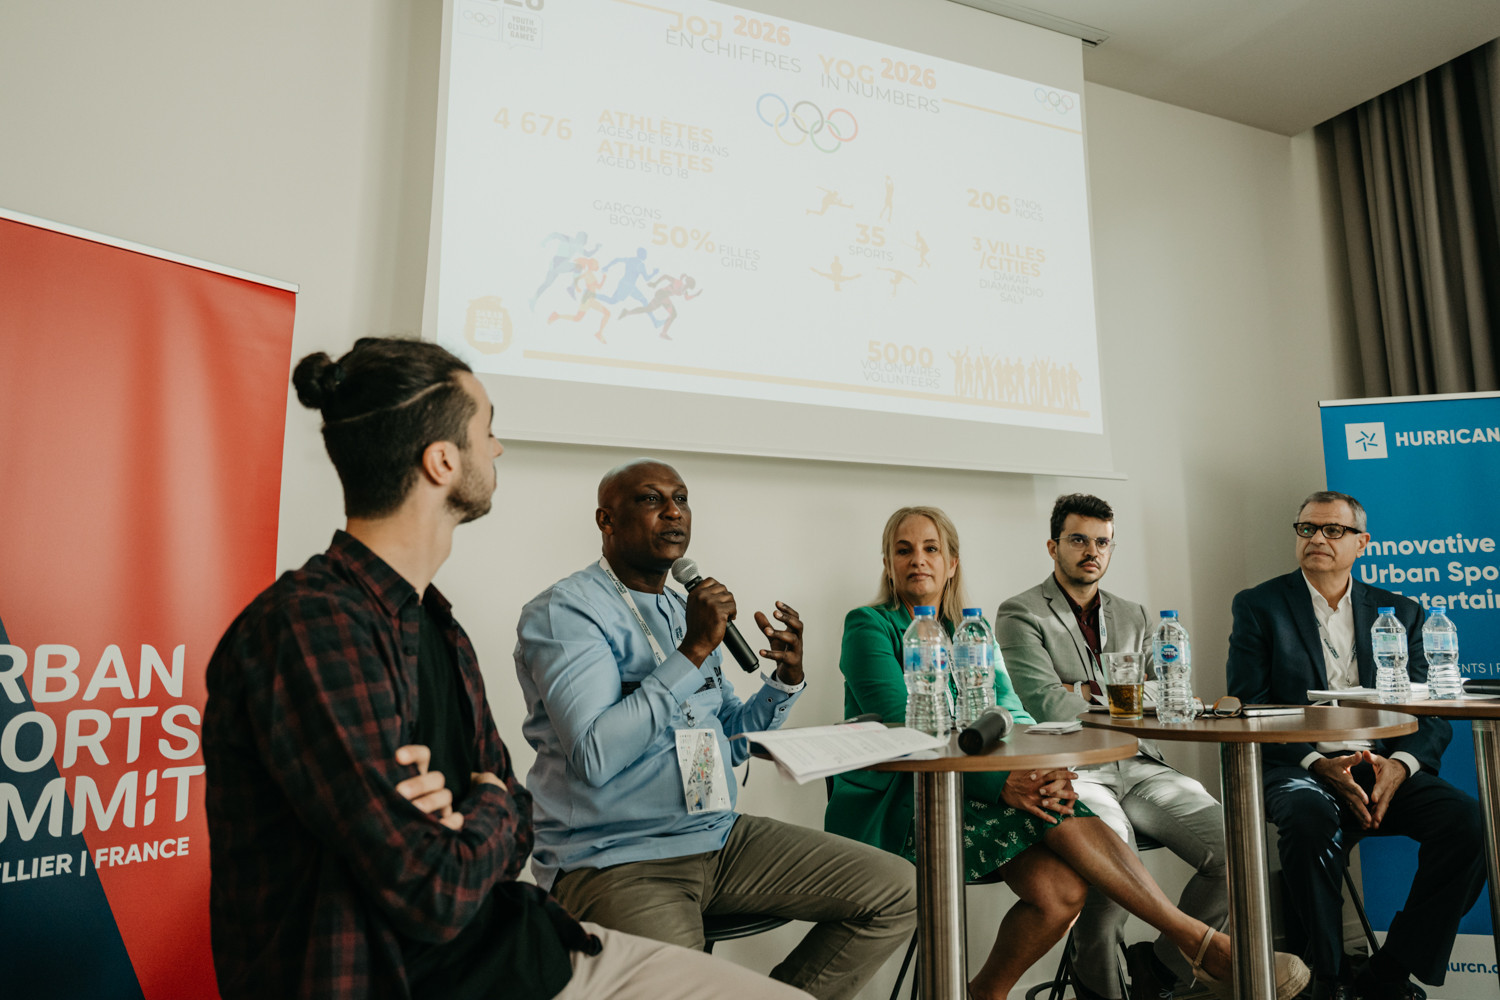 Ibrahima Wade, second from left, of Dakar 2026 spoke about how the upcoming Youth Olympic Games is set to utilise urban sports to inspire young people to take up sport ©Hurricane - FISE